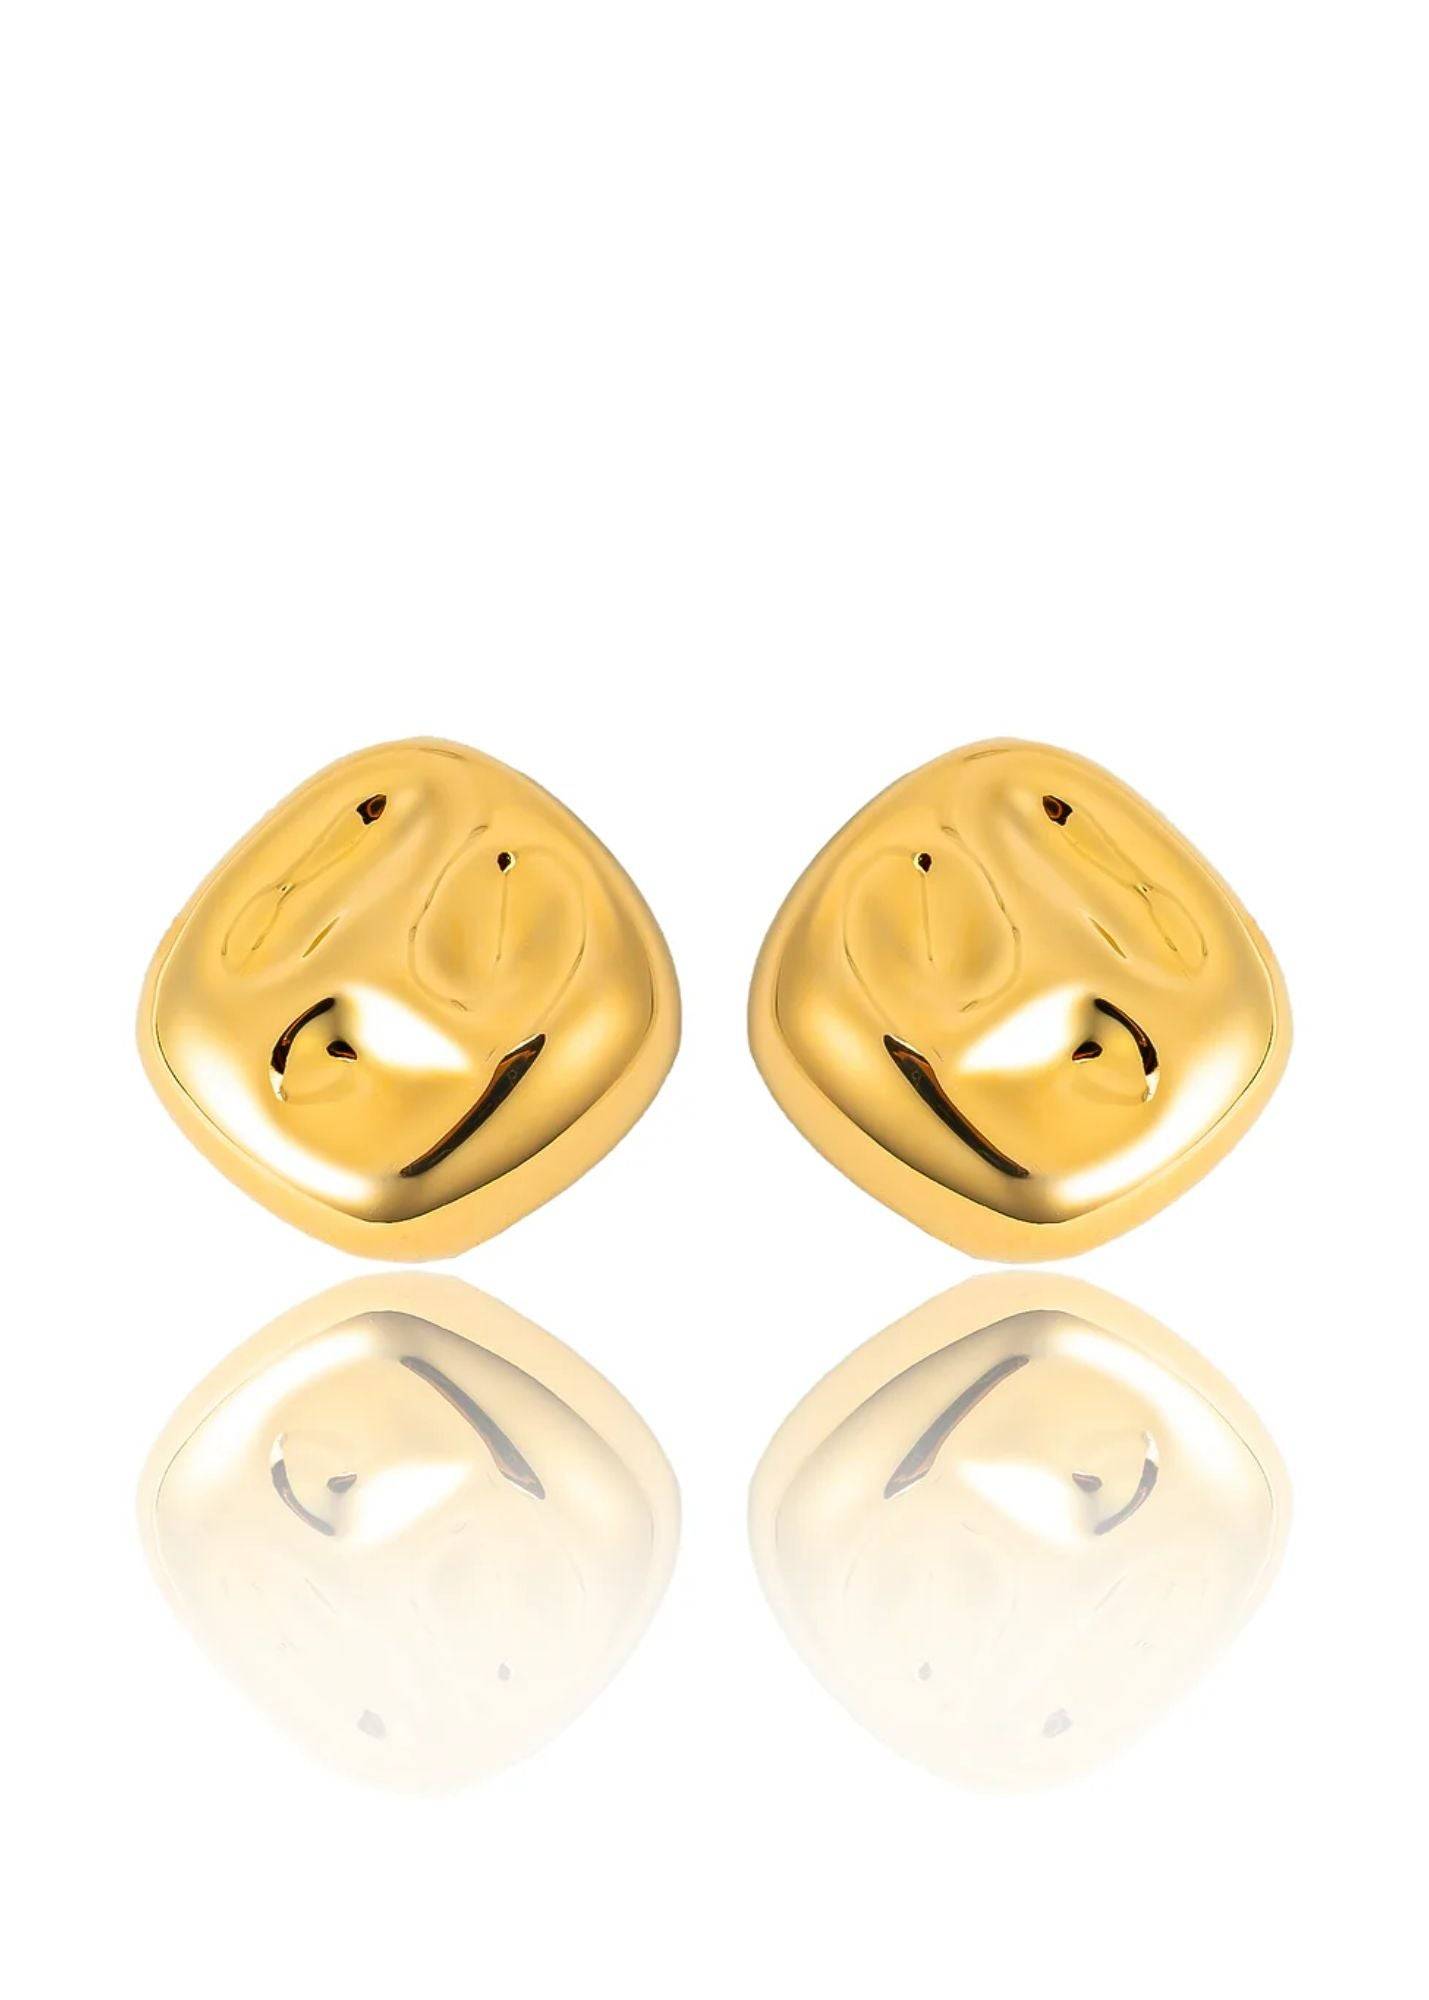 Square Maximalist Statement Stud Earrings in 18K Gold Filled from Inaury.com